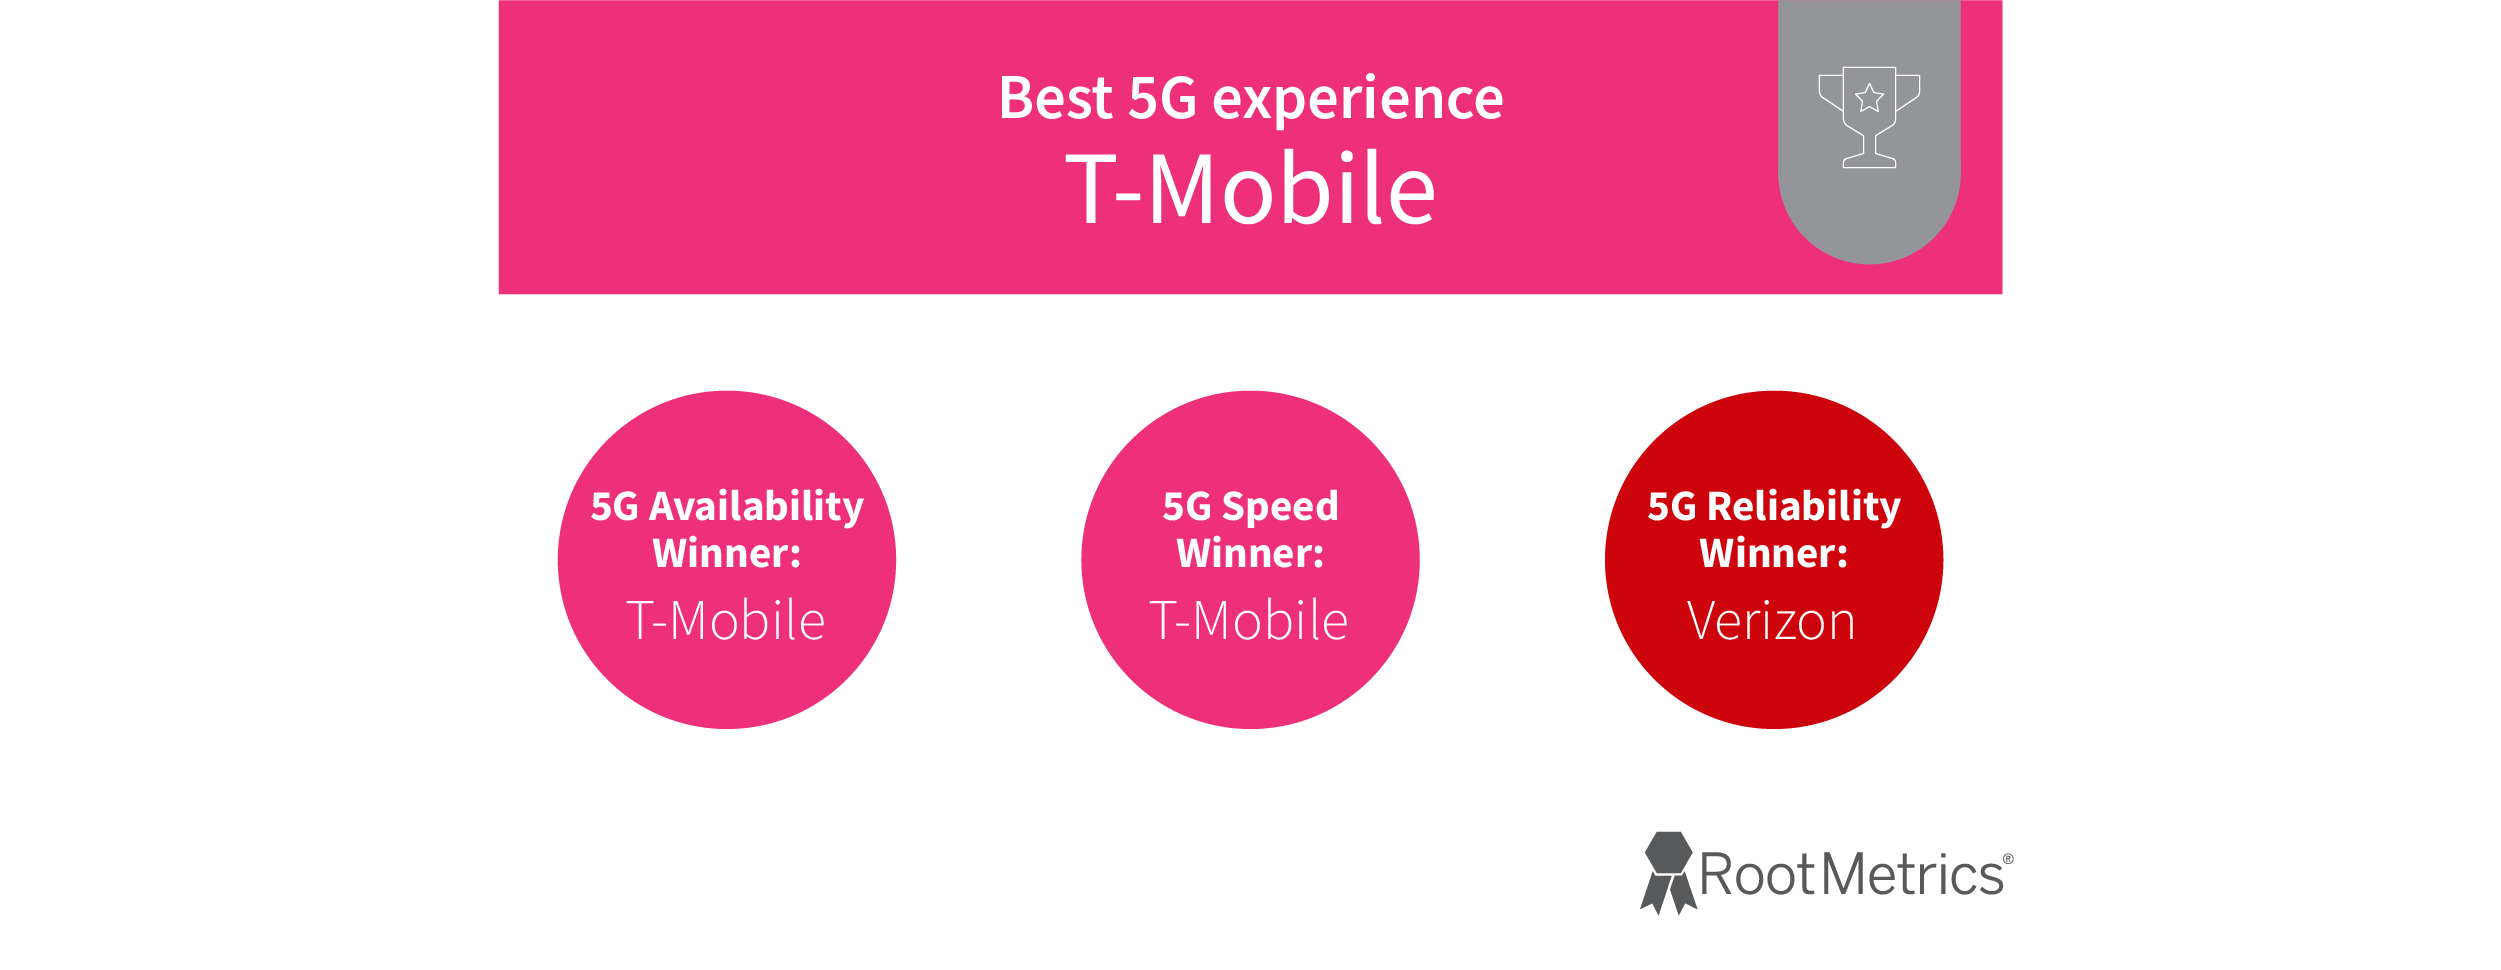 Charts show T-Mobile 5G was the best according to RootMetrics at 1H 2022